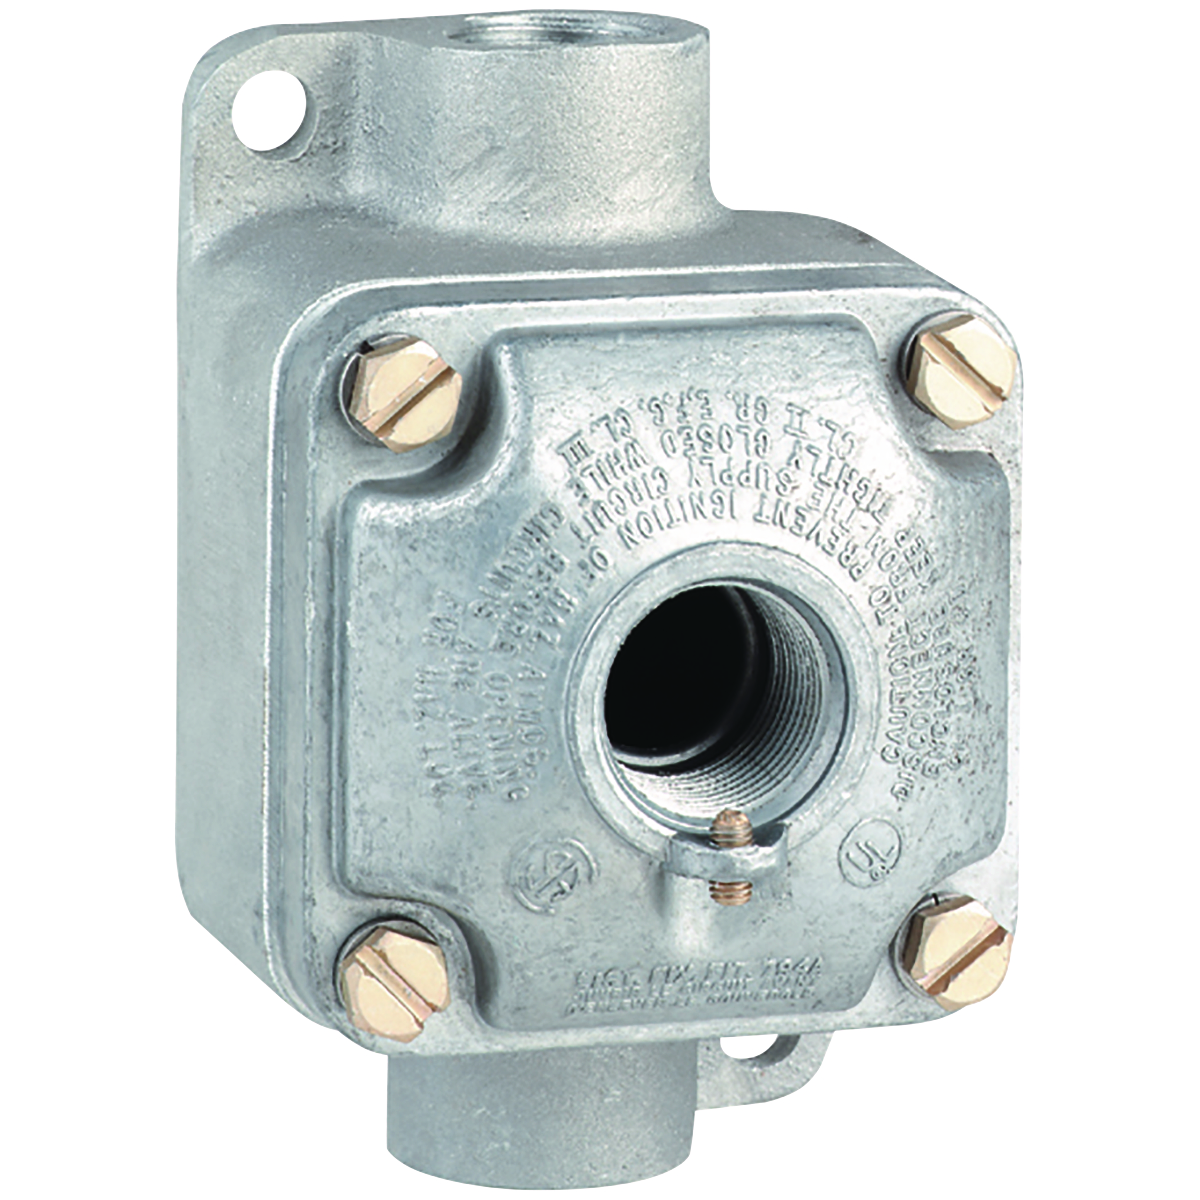 JL SERIES - ALUMINUM OUTLET BODY WITH COVER - WITH HUB COVER - BOX TYPEC - BOX HUB SIZE 1/2 INCH - COVER HUB SIZE 1/2 INCH